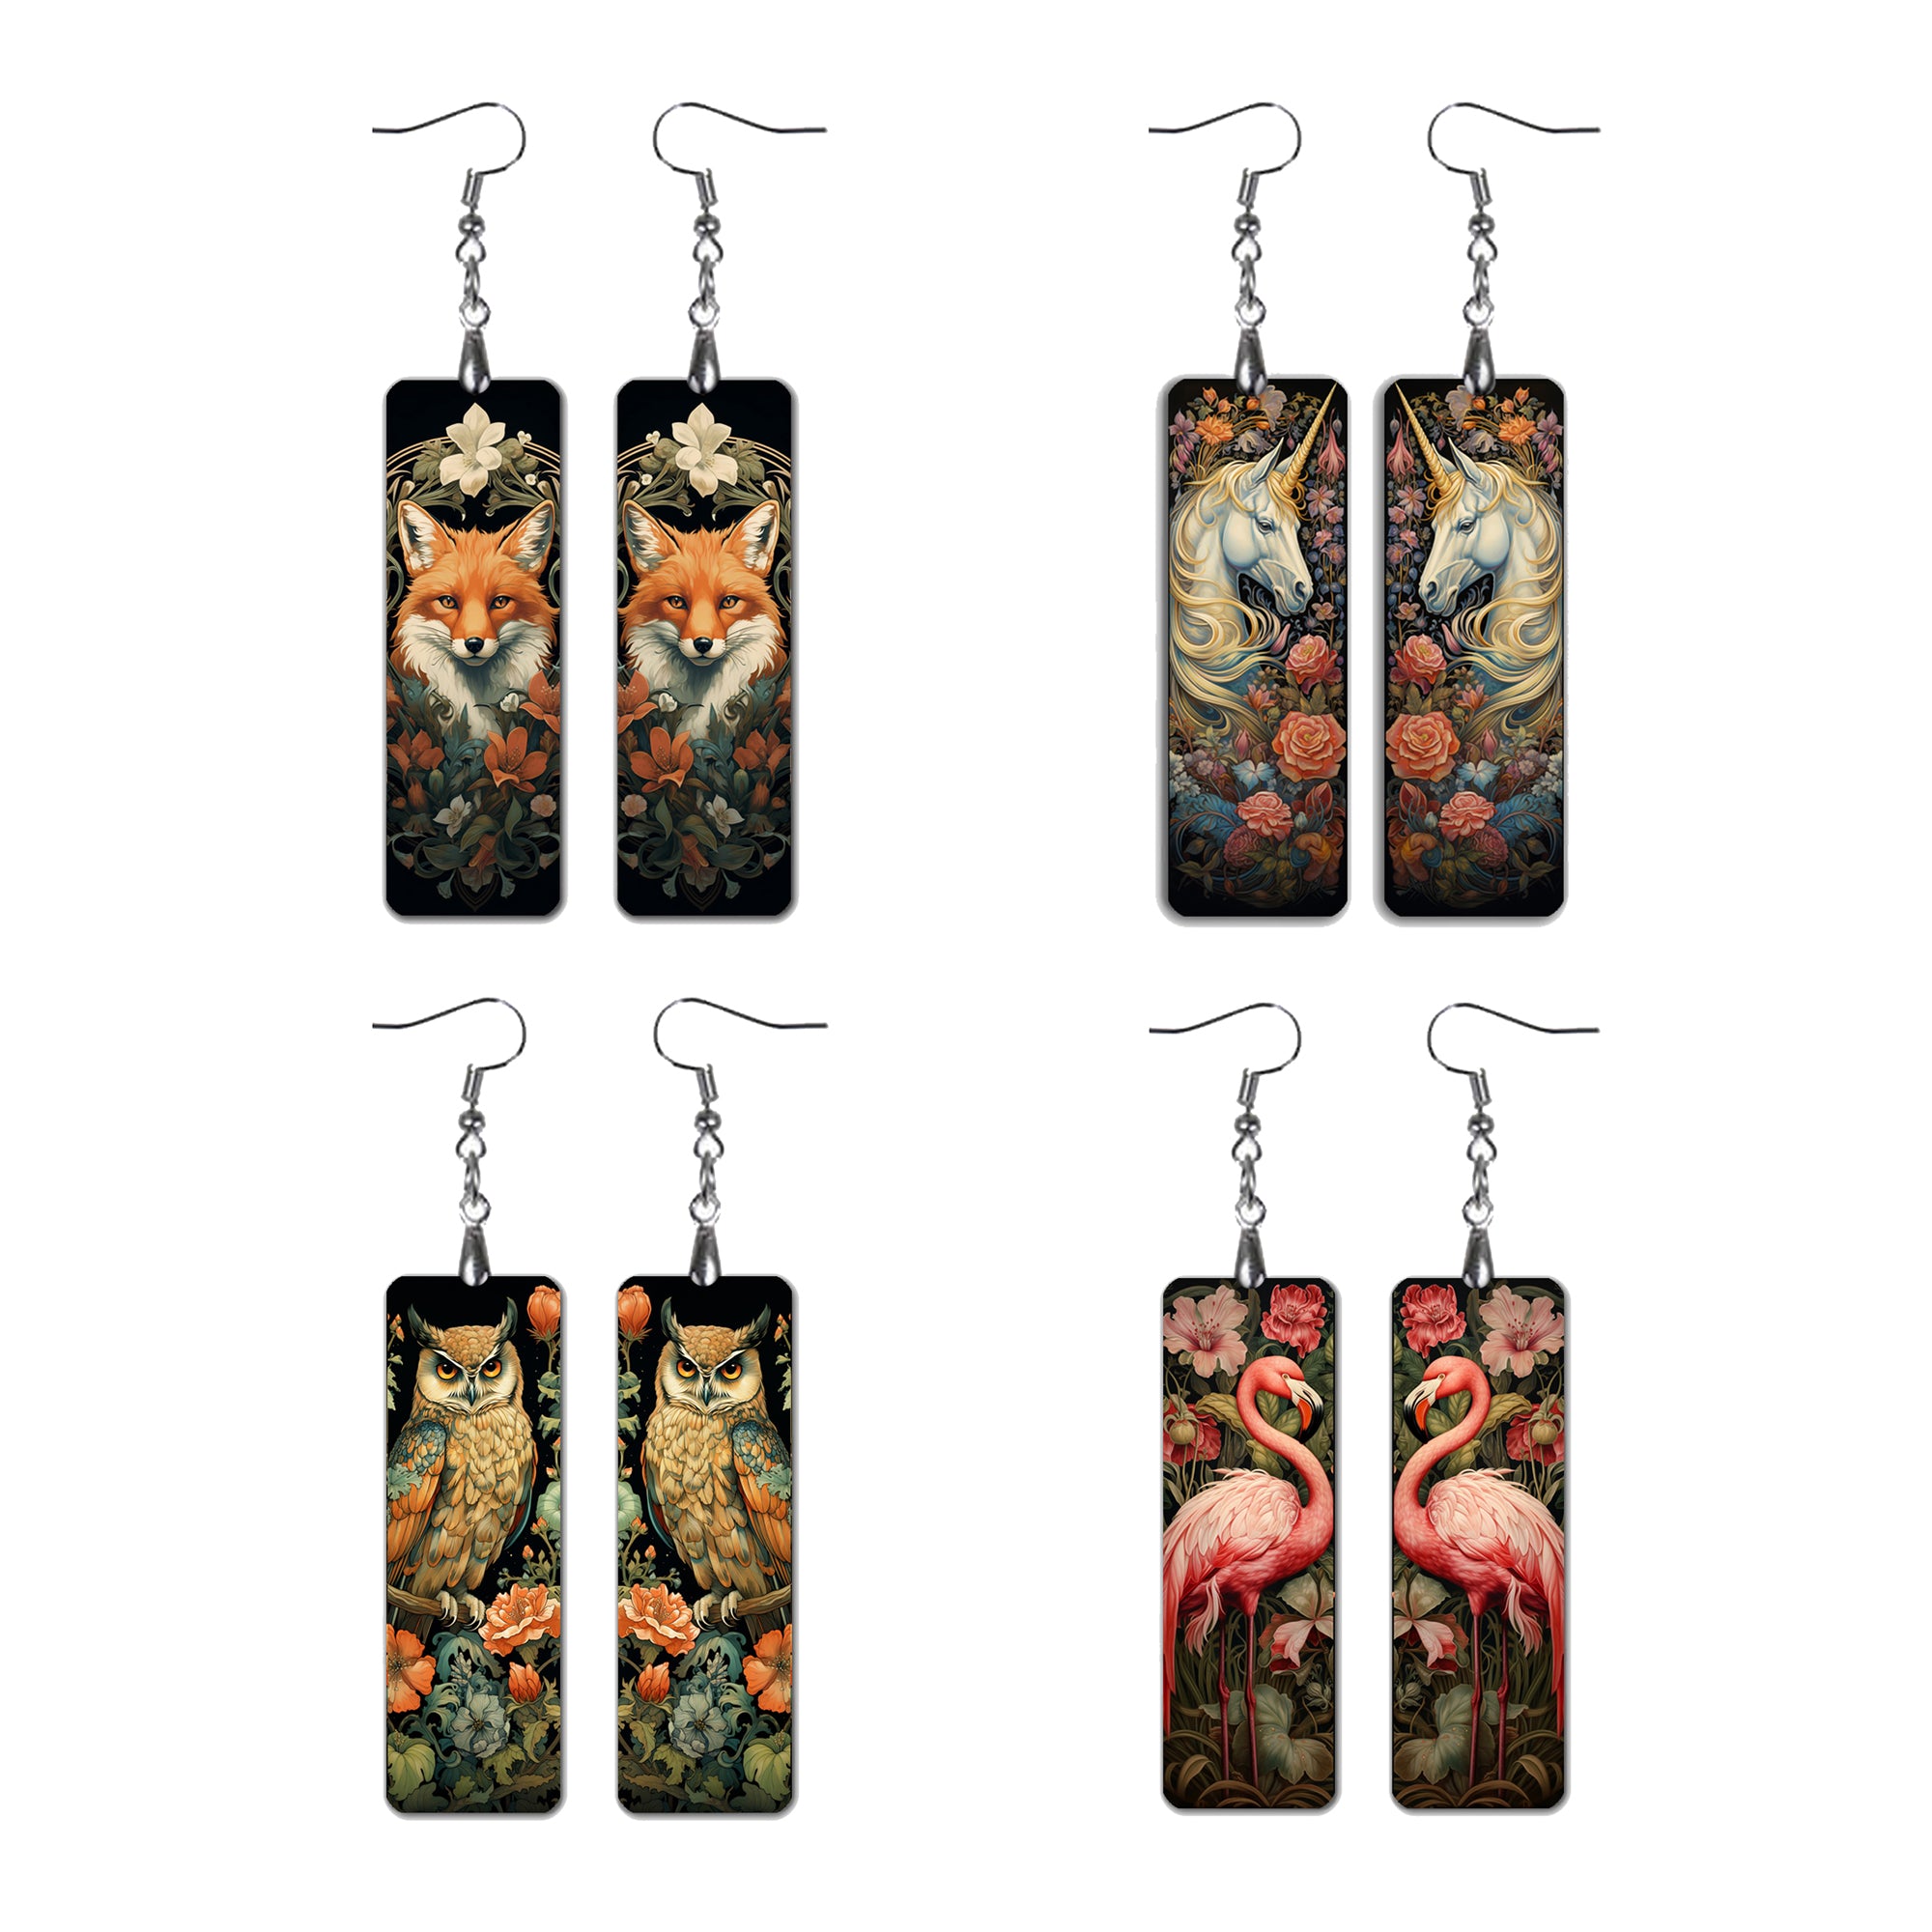 Earrings with animals in Art Nouveau style